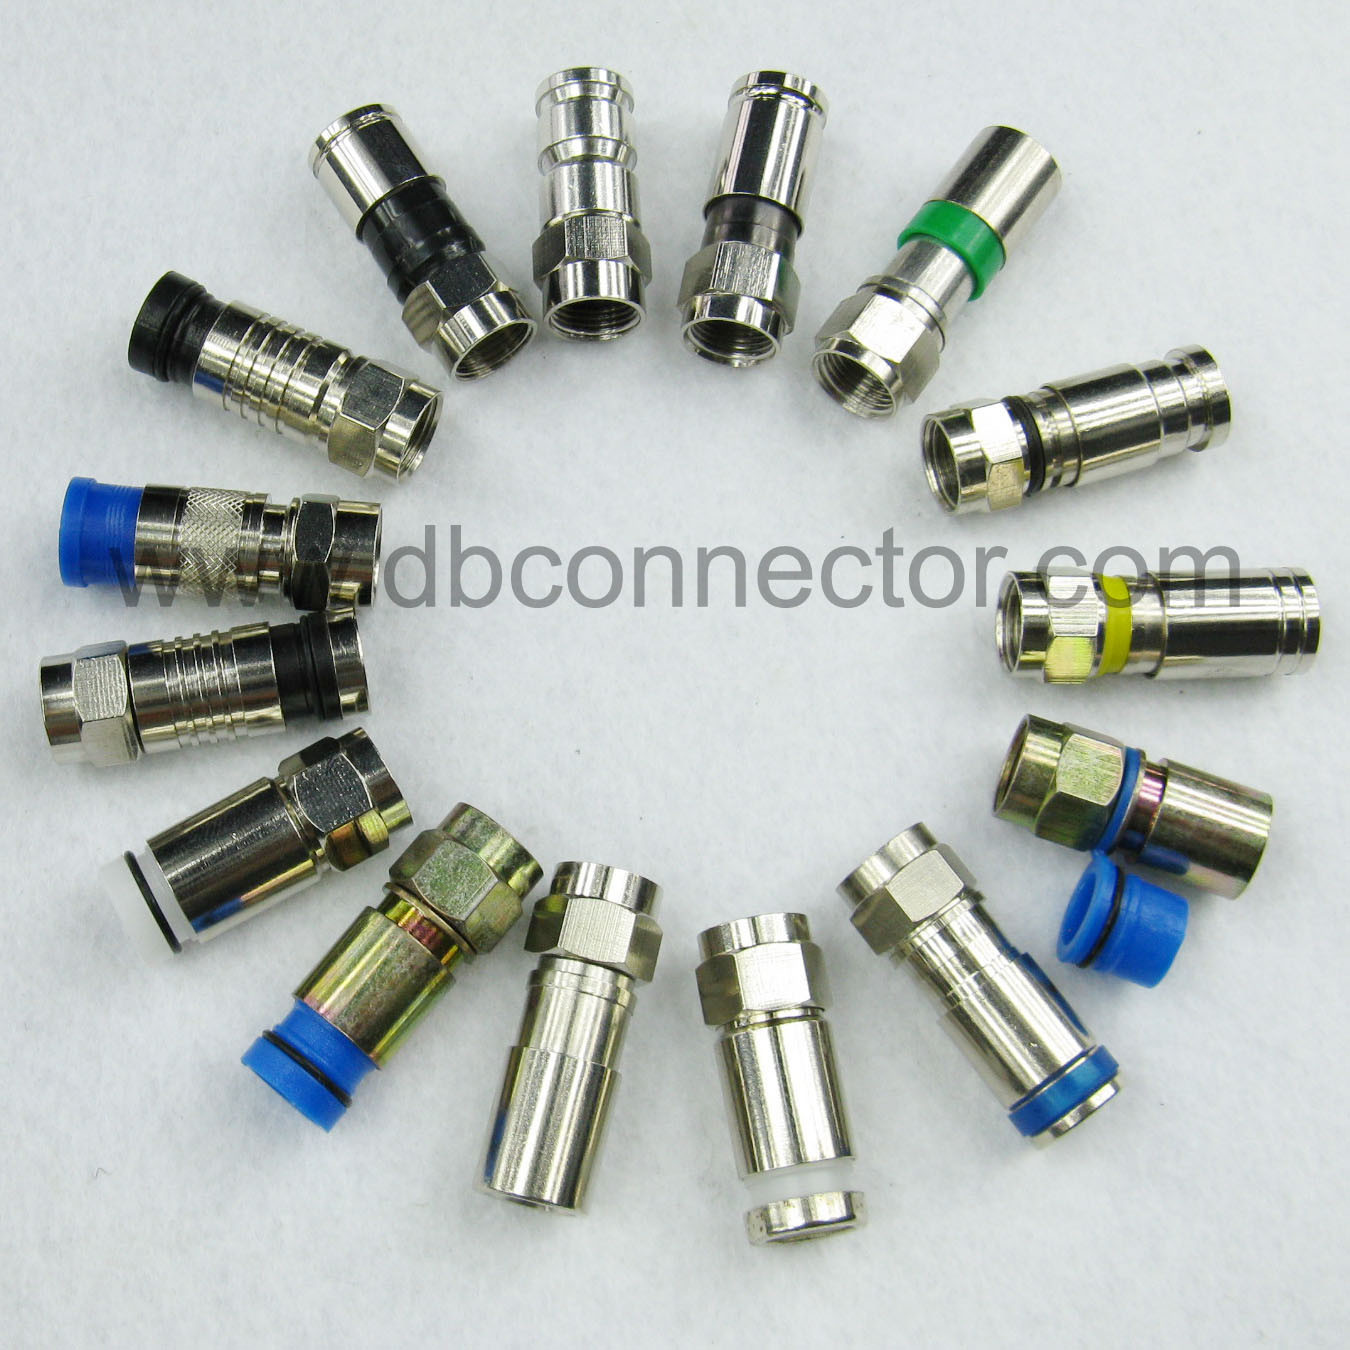 Coaxial Connector Types